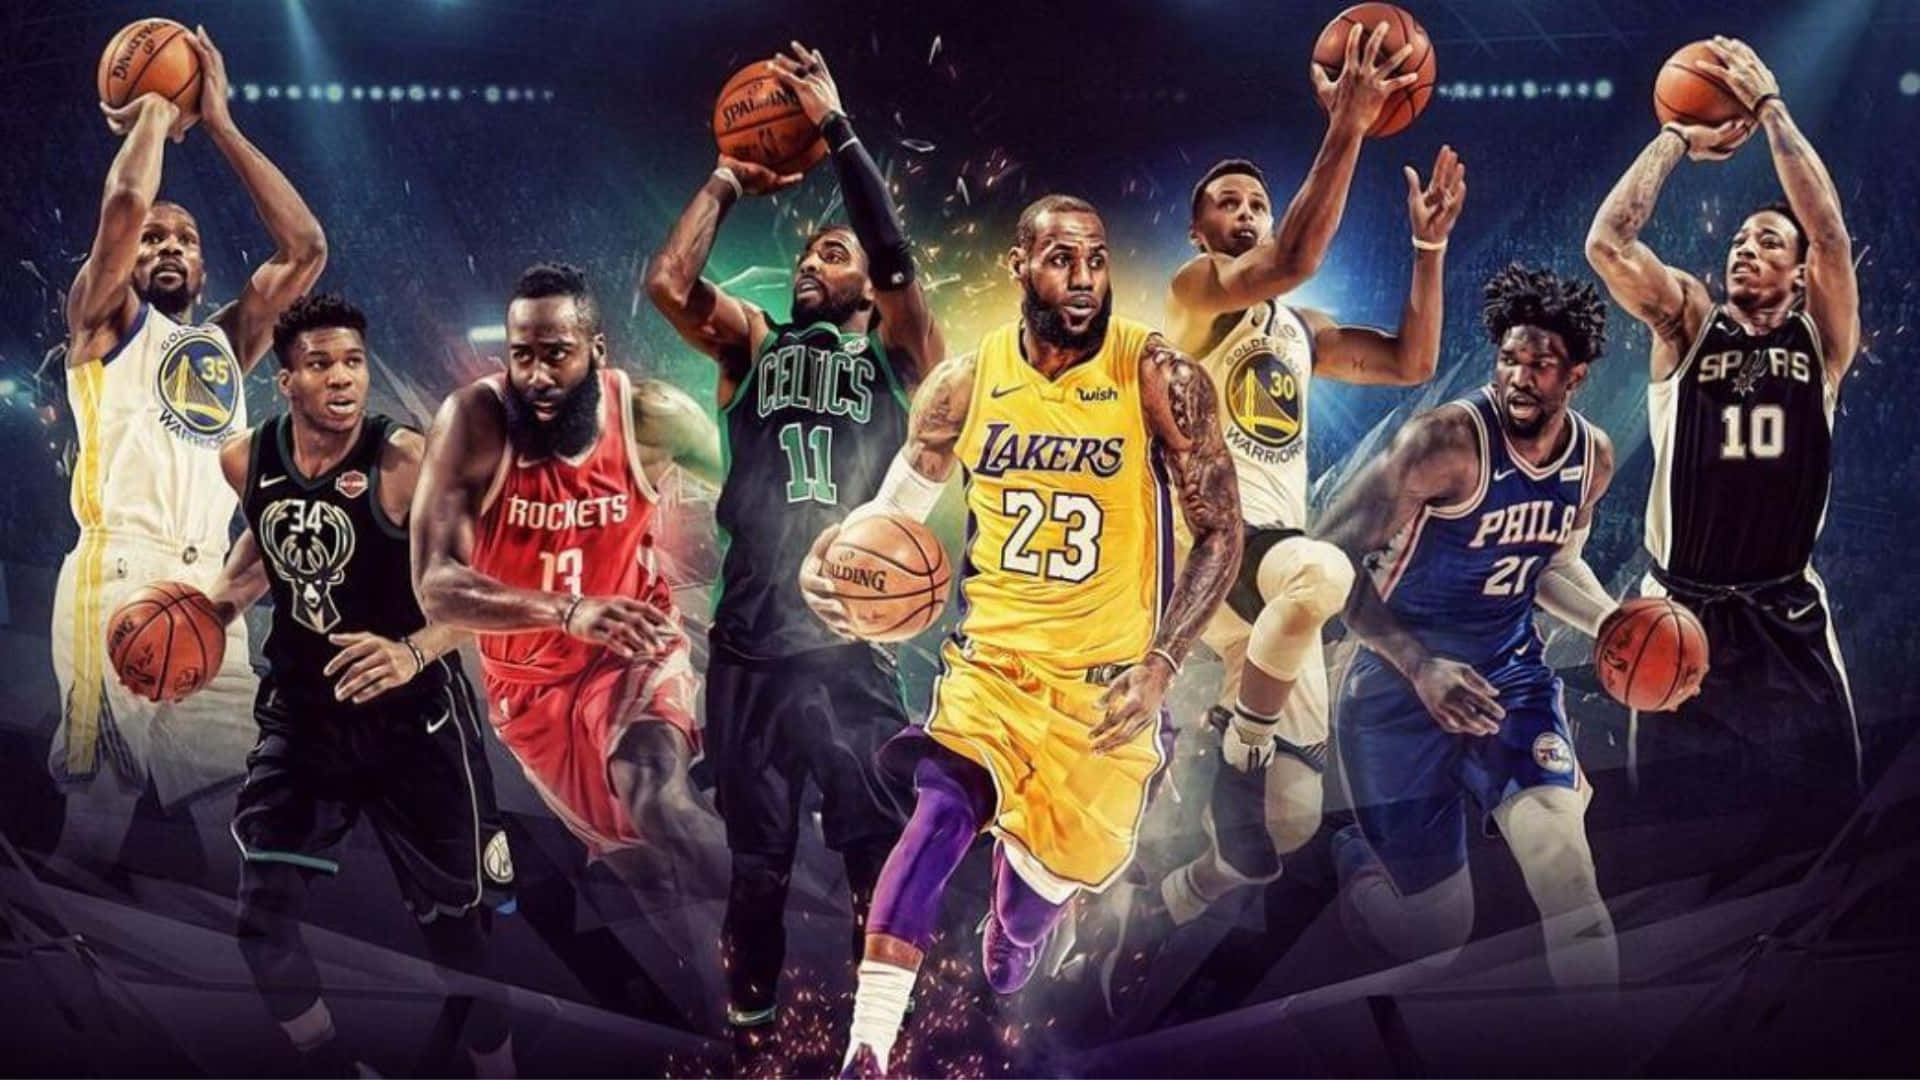 N B A All Star Players Collage Wallpaper